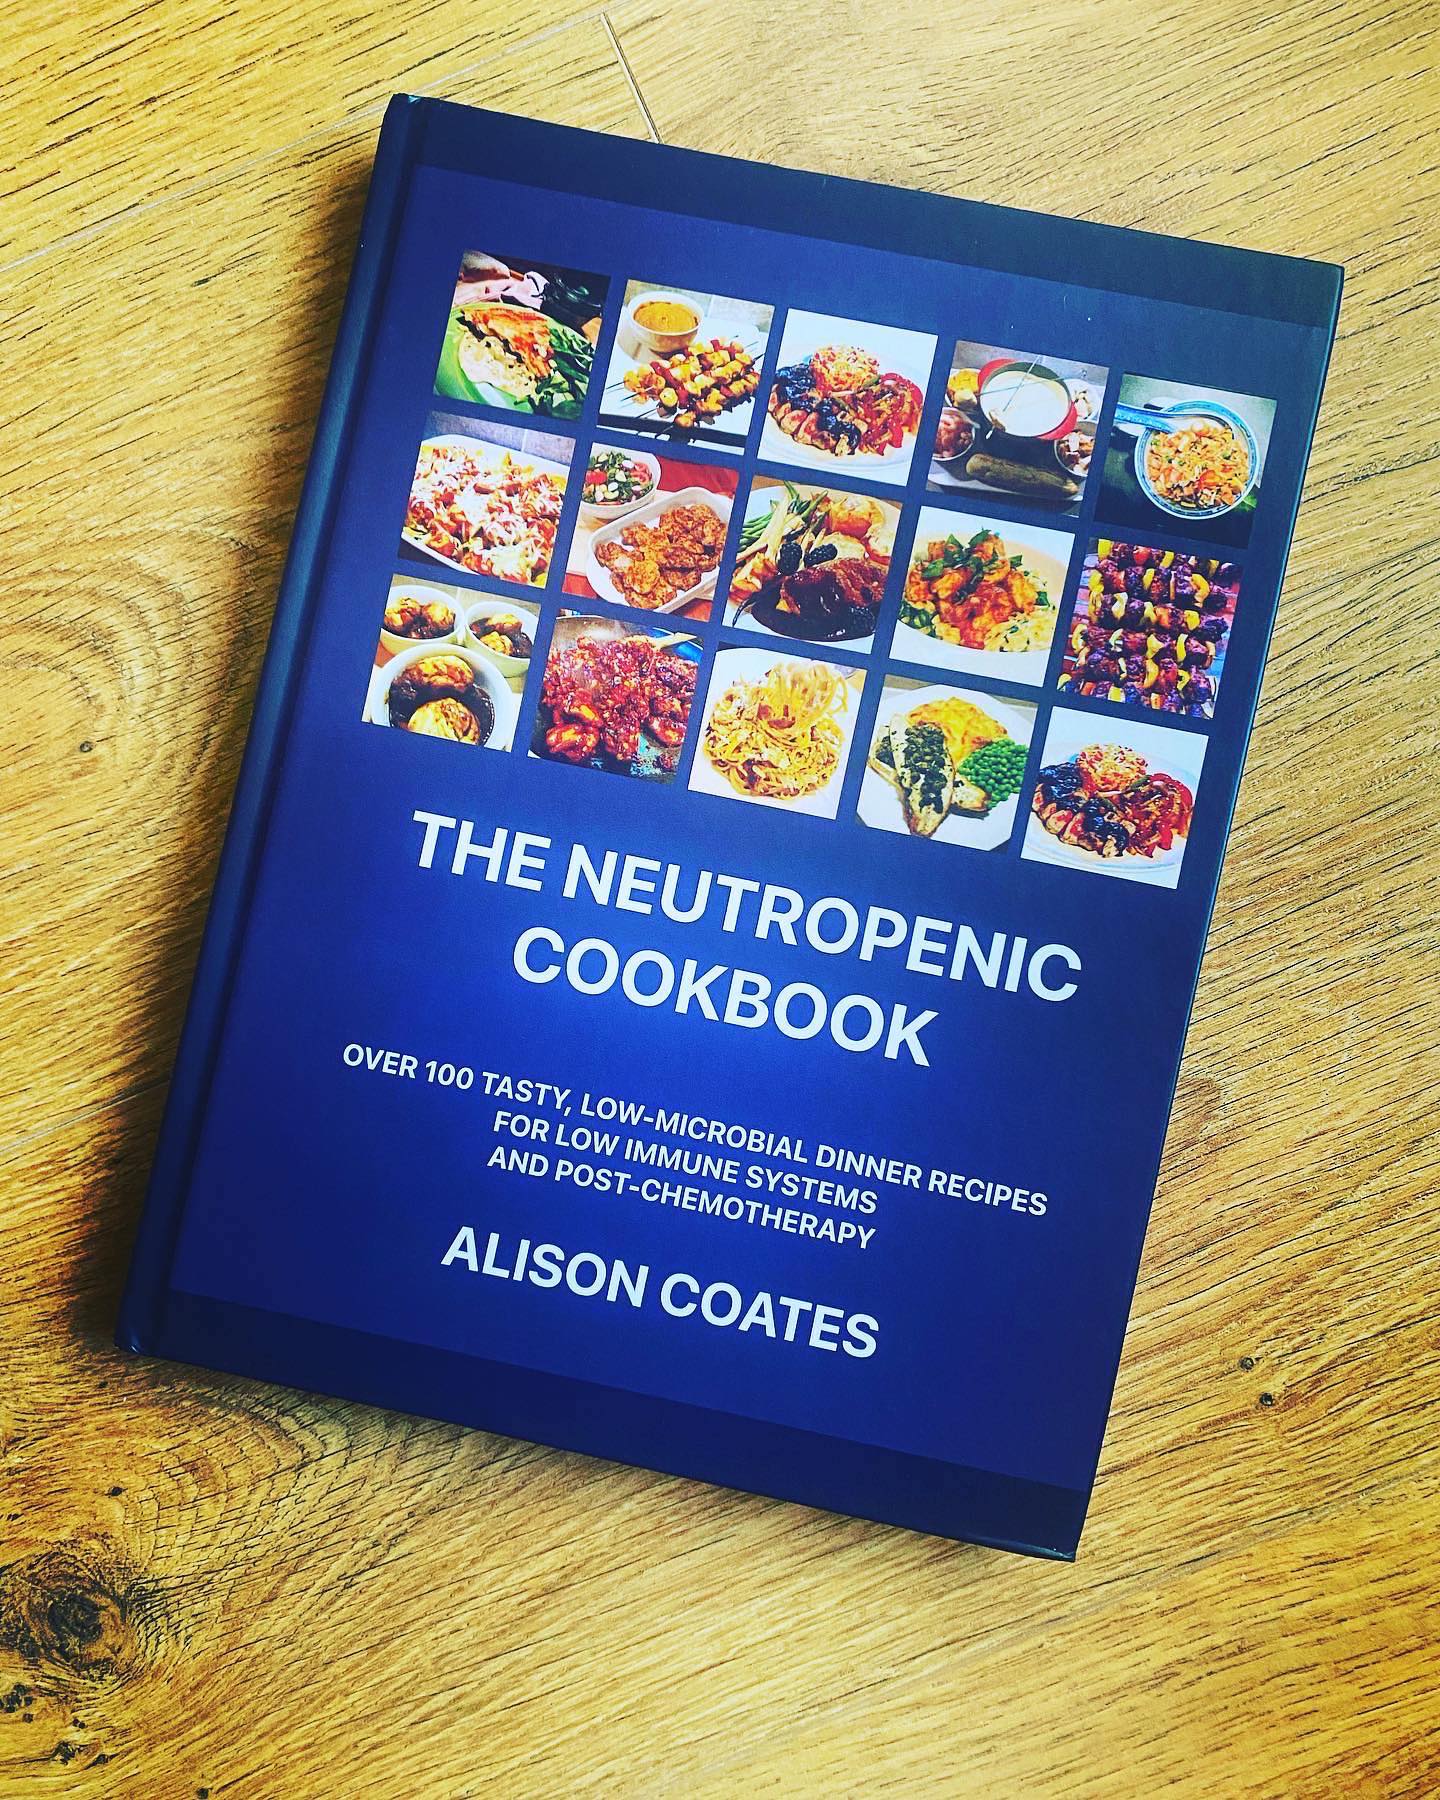 Alison Coates has written The Neutropenic Cookbook with over 100 tasty, low-microbial dinner recipes for low immune systems and post-chemotherapy